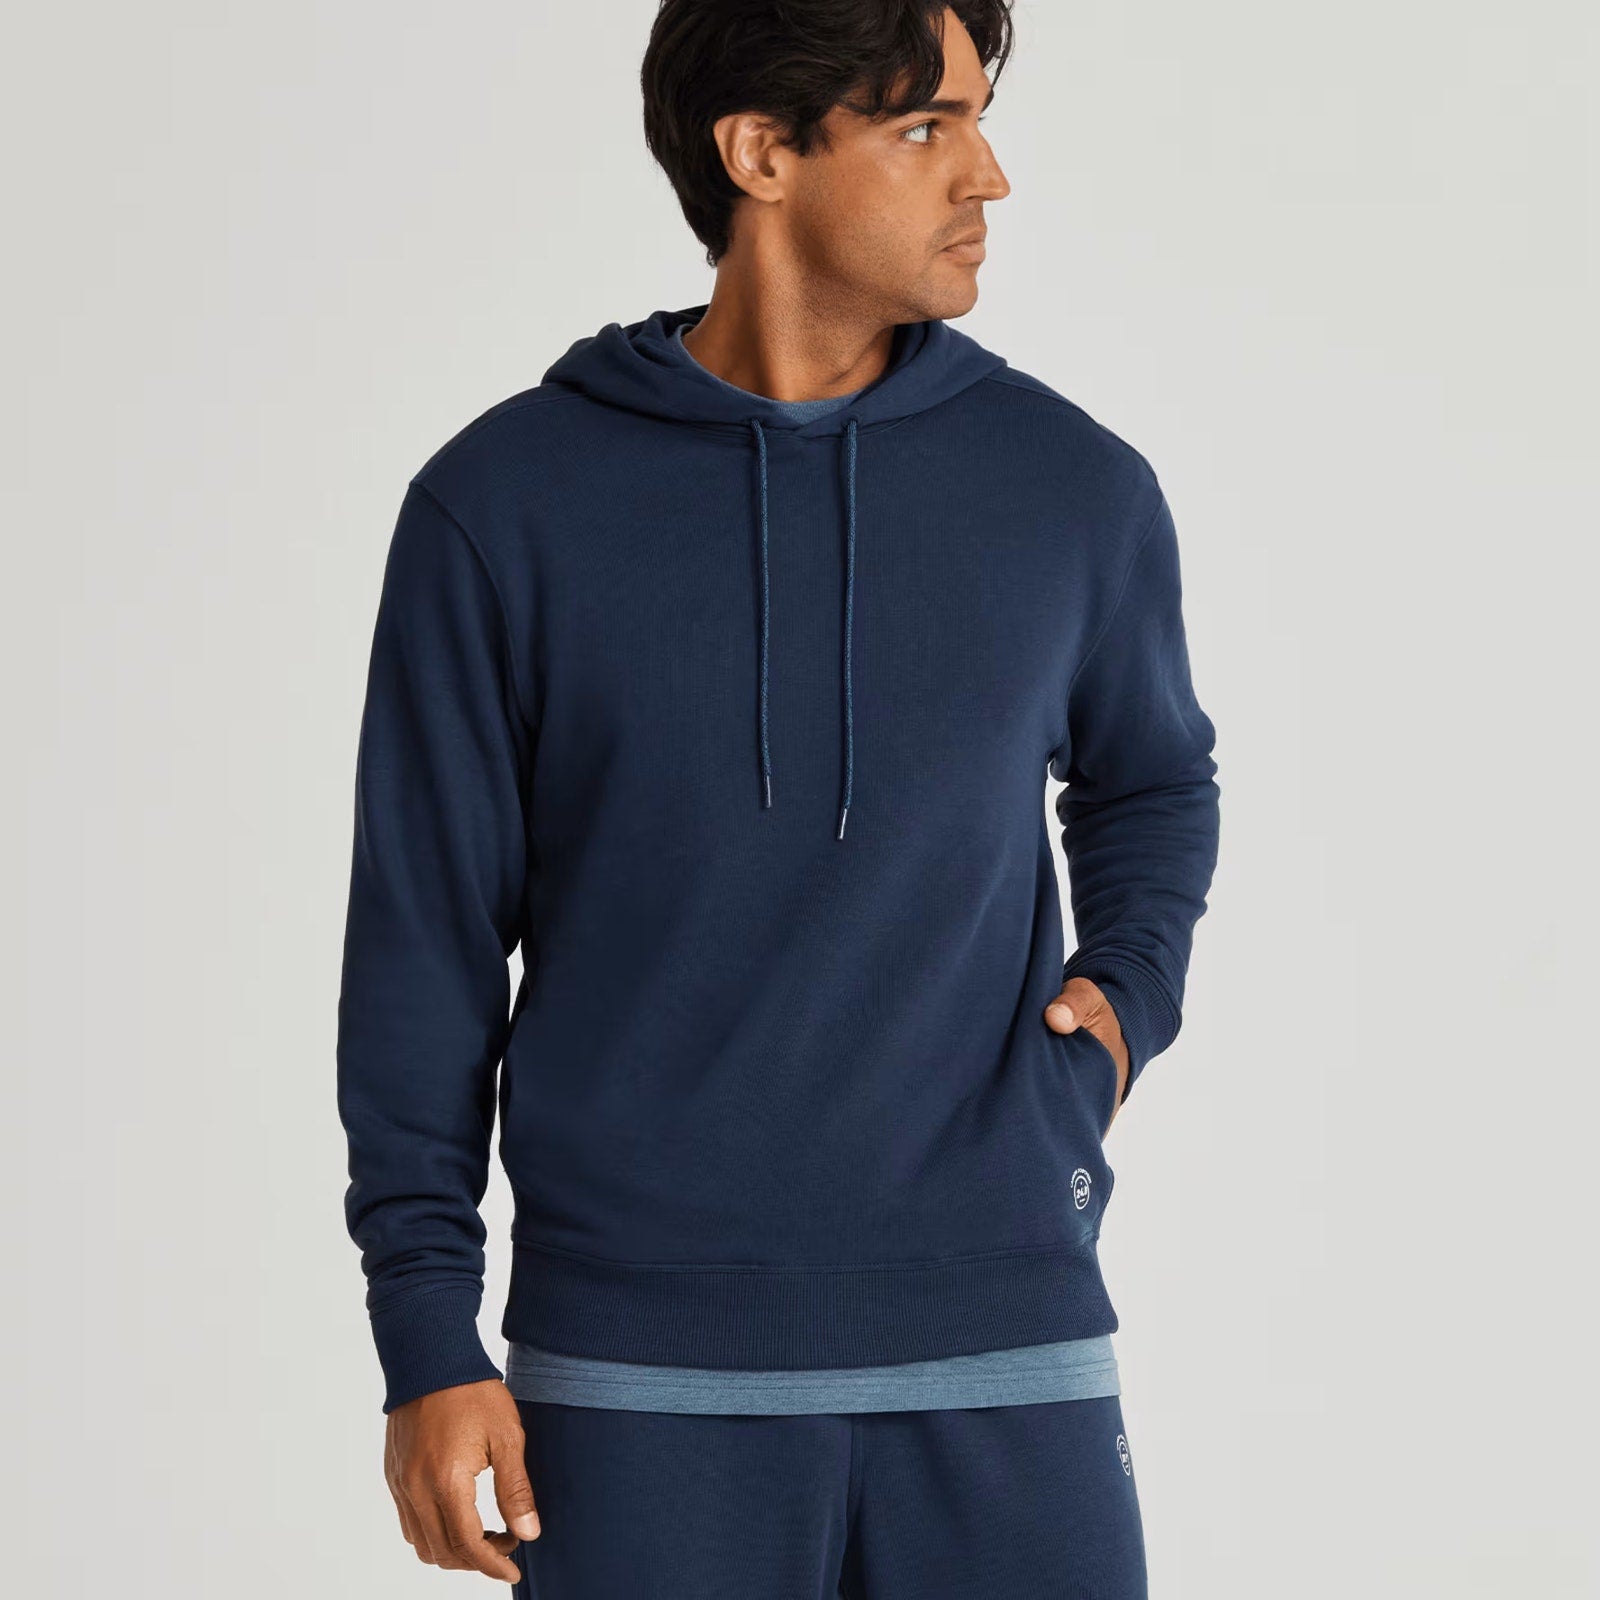 Allbirds NWT True Navy The R&R Hoodie Pullover Size Large